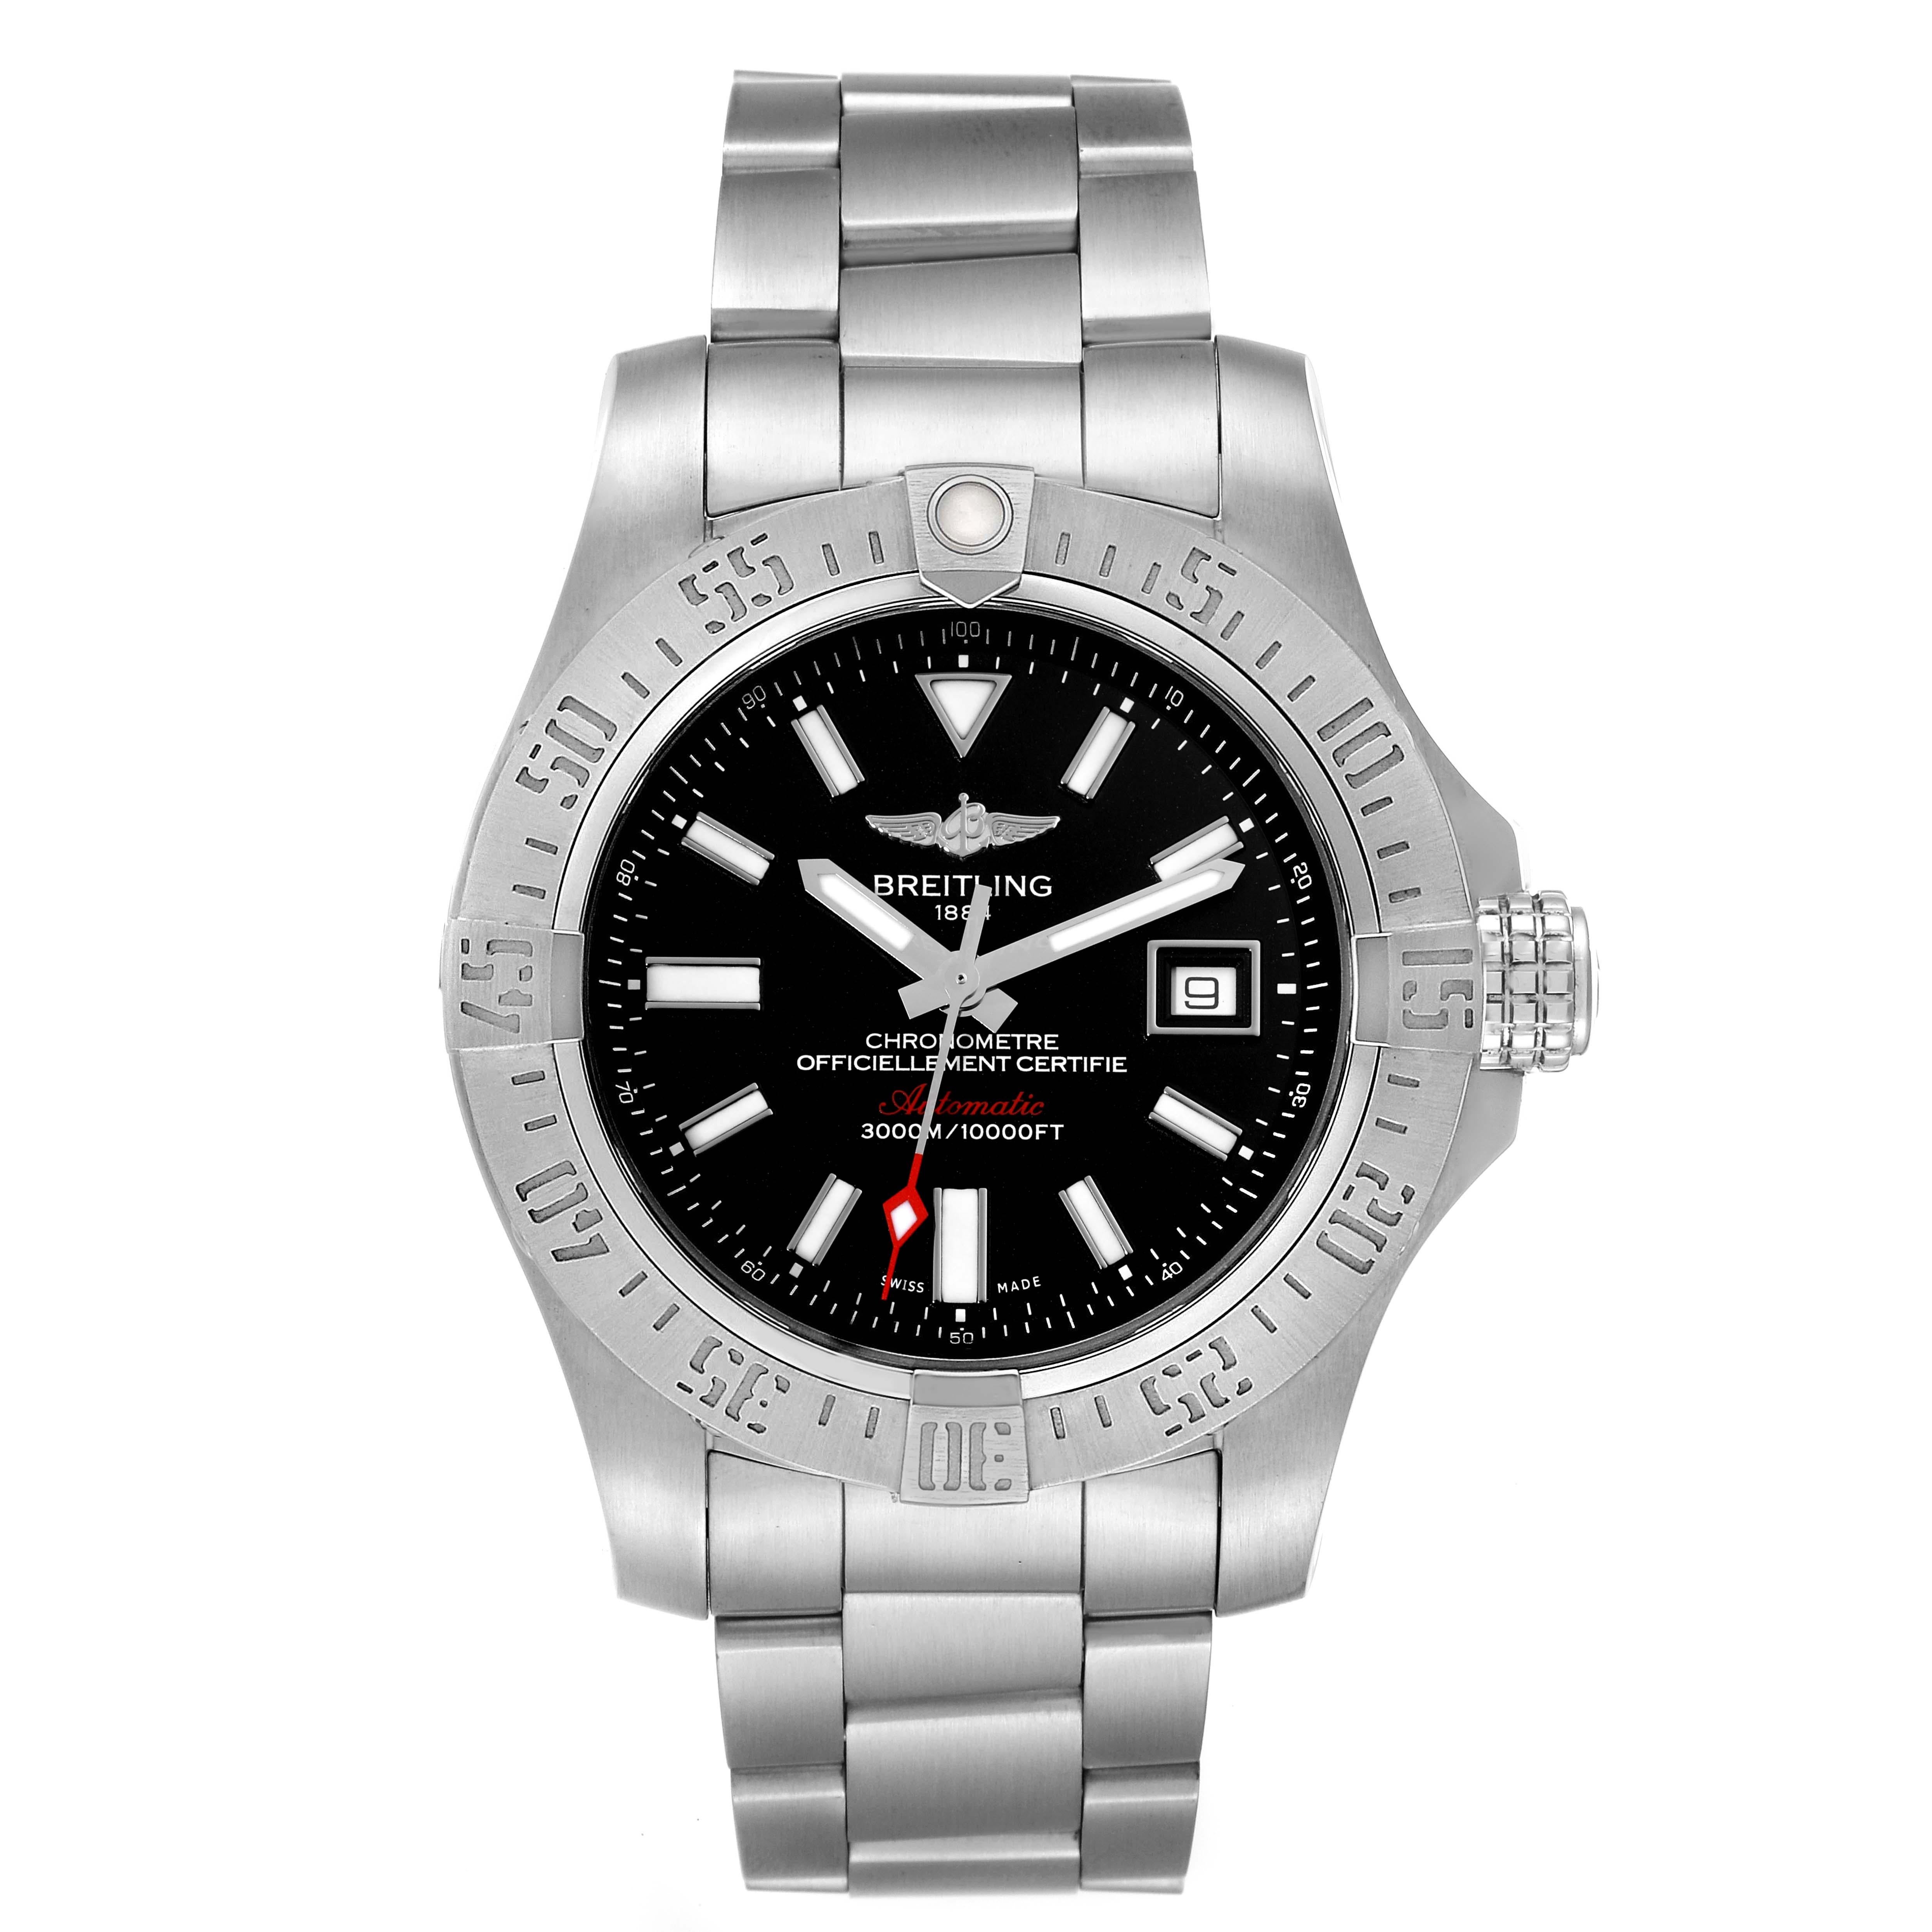 Breitling Avenger II 45 Seawolf Steel Mens Watch A17331 Box Card. Automatic self-winding movement. Stainless steel case 45 mm in diameter with screwed-down crown and pushers. Stainless steel unidirectional rotating bezel. 0-60 elapsed-time. Four 15